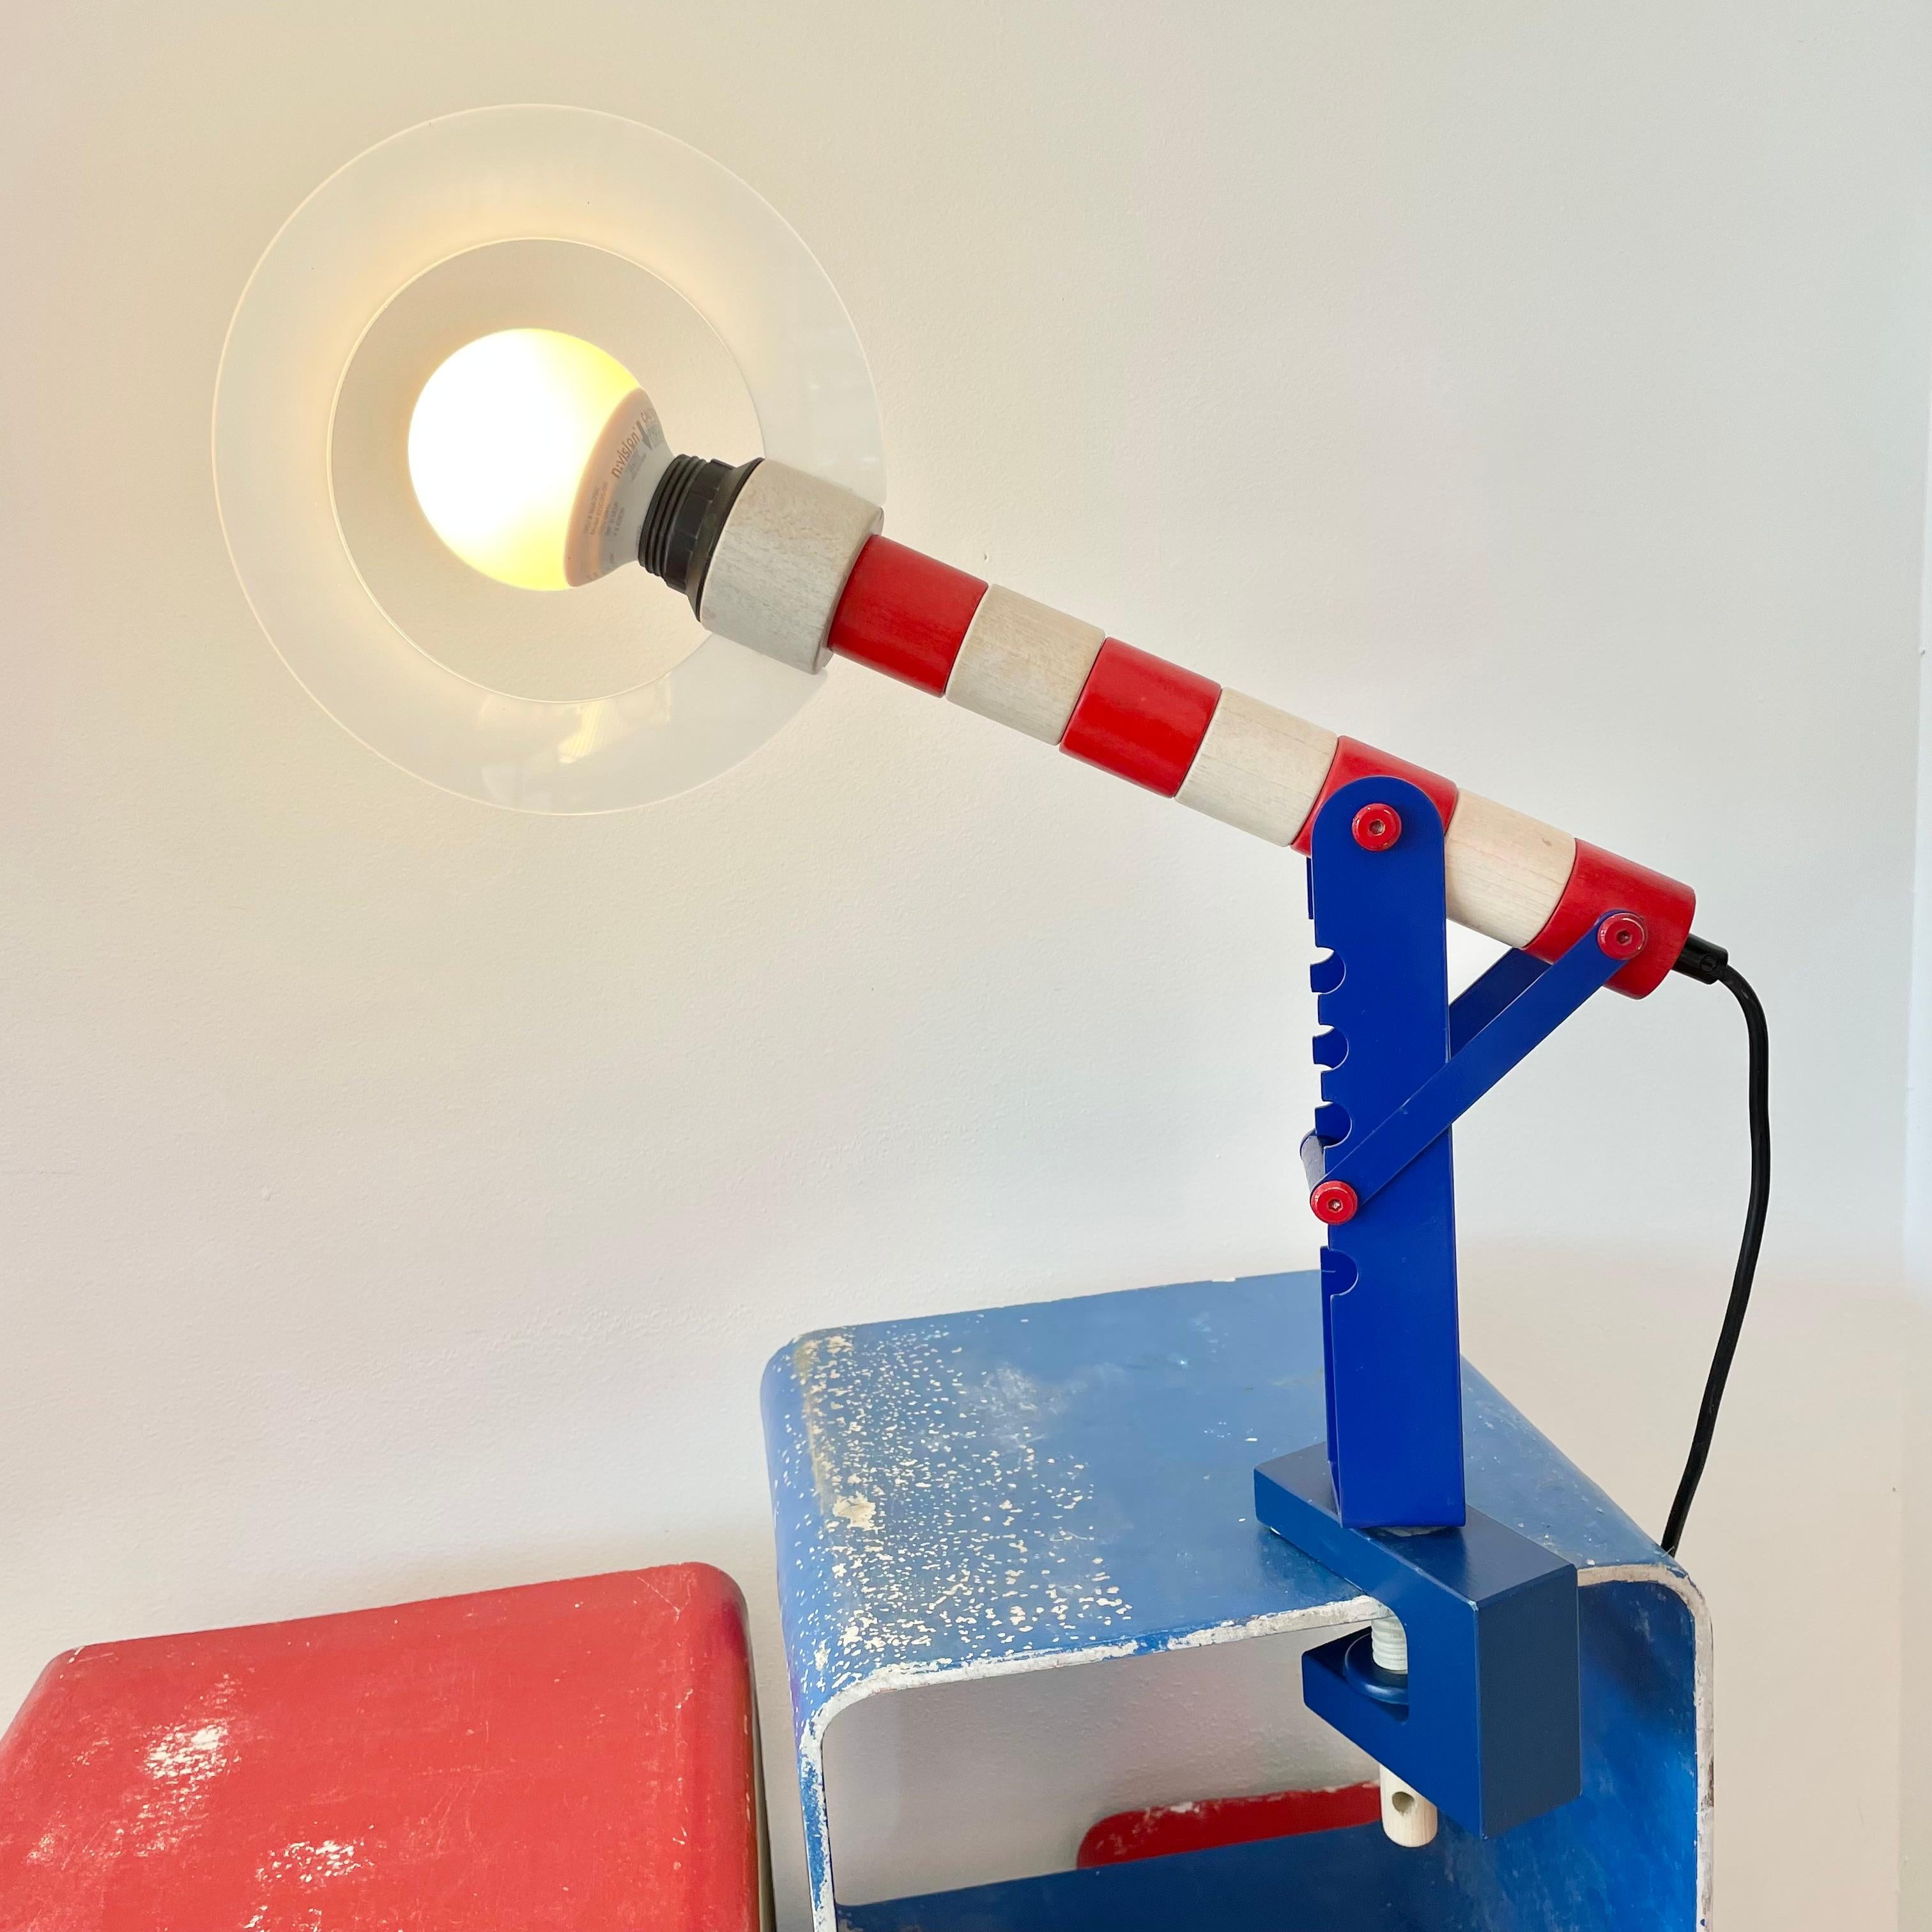 Great Postmodern wood lamp by Haba, Germany. Made in the 1980s. Wood dowel tightens the base so that it can clamp on to a desktop/tabletop/shelf. Height is adjustable. Painted wood and metal. Rotates 360 degrees. Great colors. Fantastic piece of